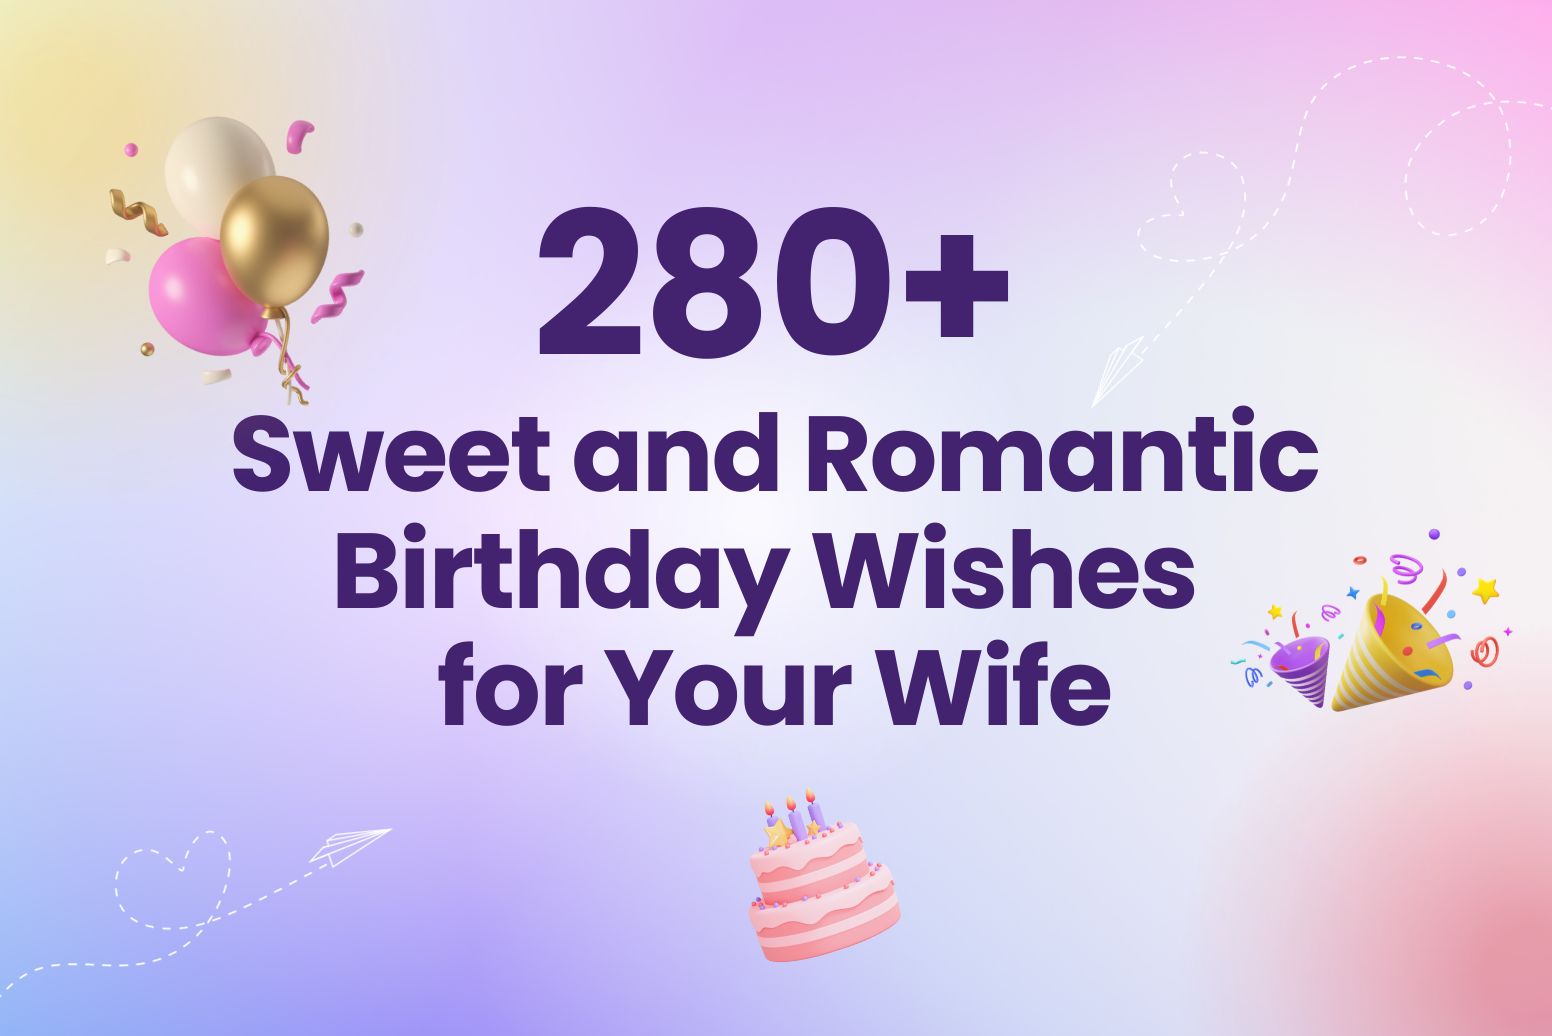 280+ Sweet and Romantic Birthday Wishes for Your Wife